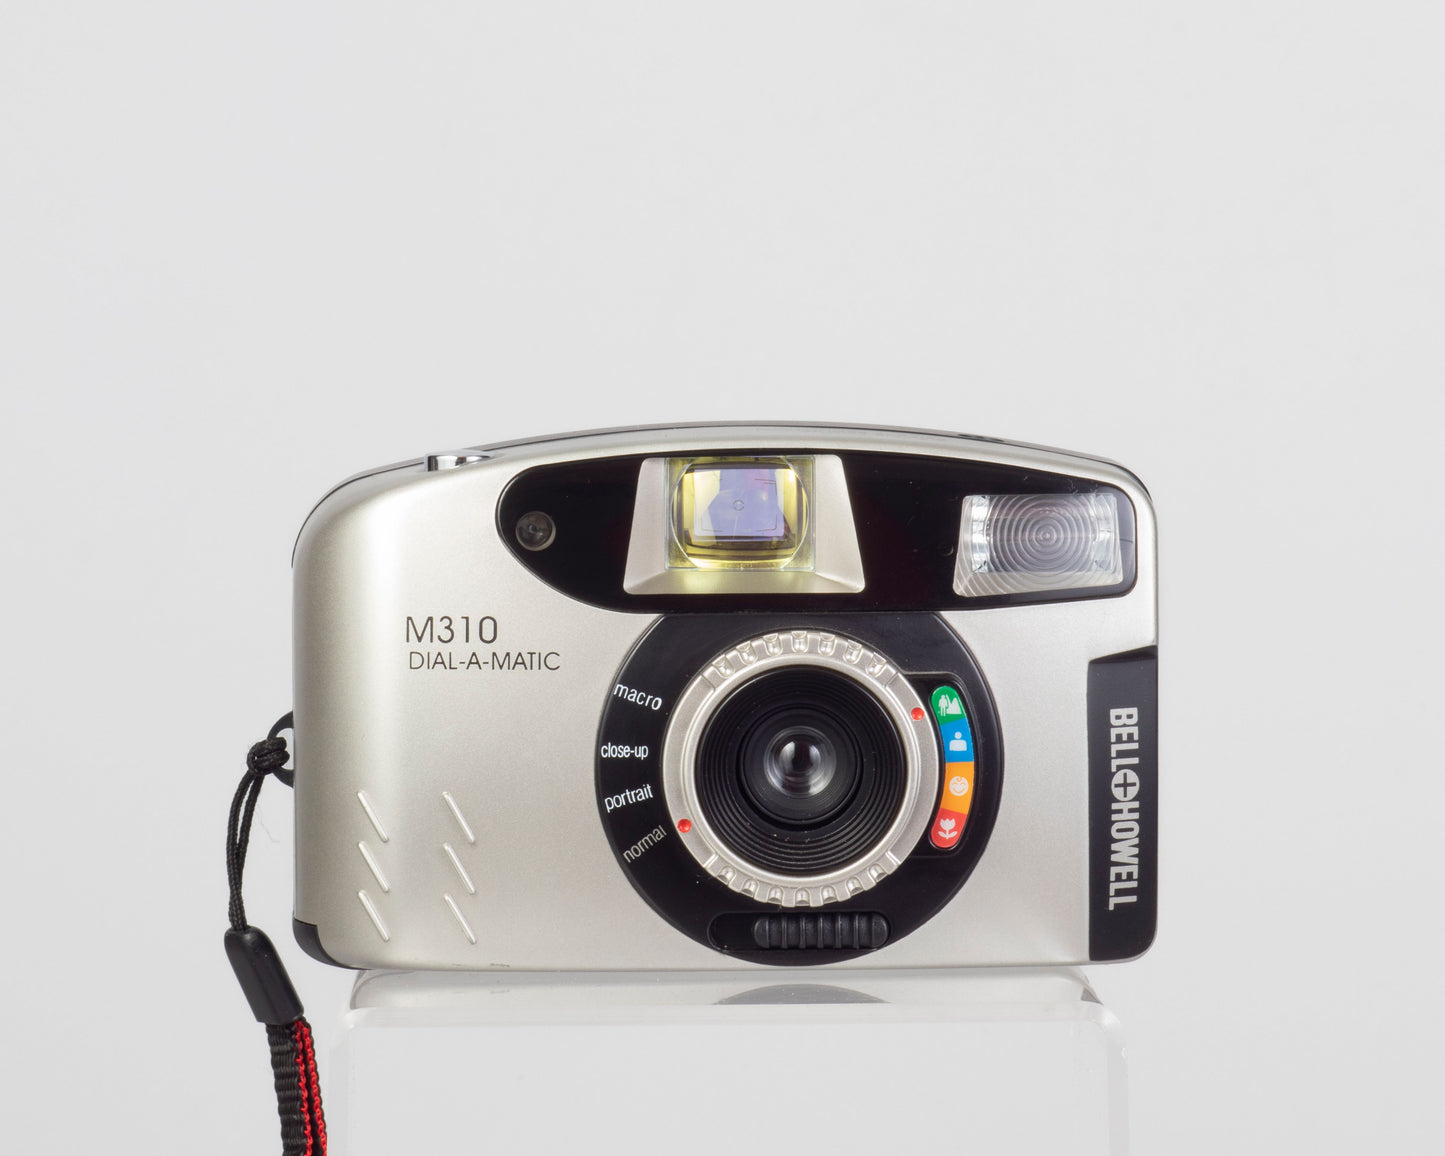 Bell and Howell M310 Dial-A-Matic zone focus 35mm point-and-shoot camera